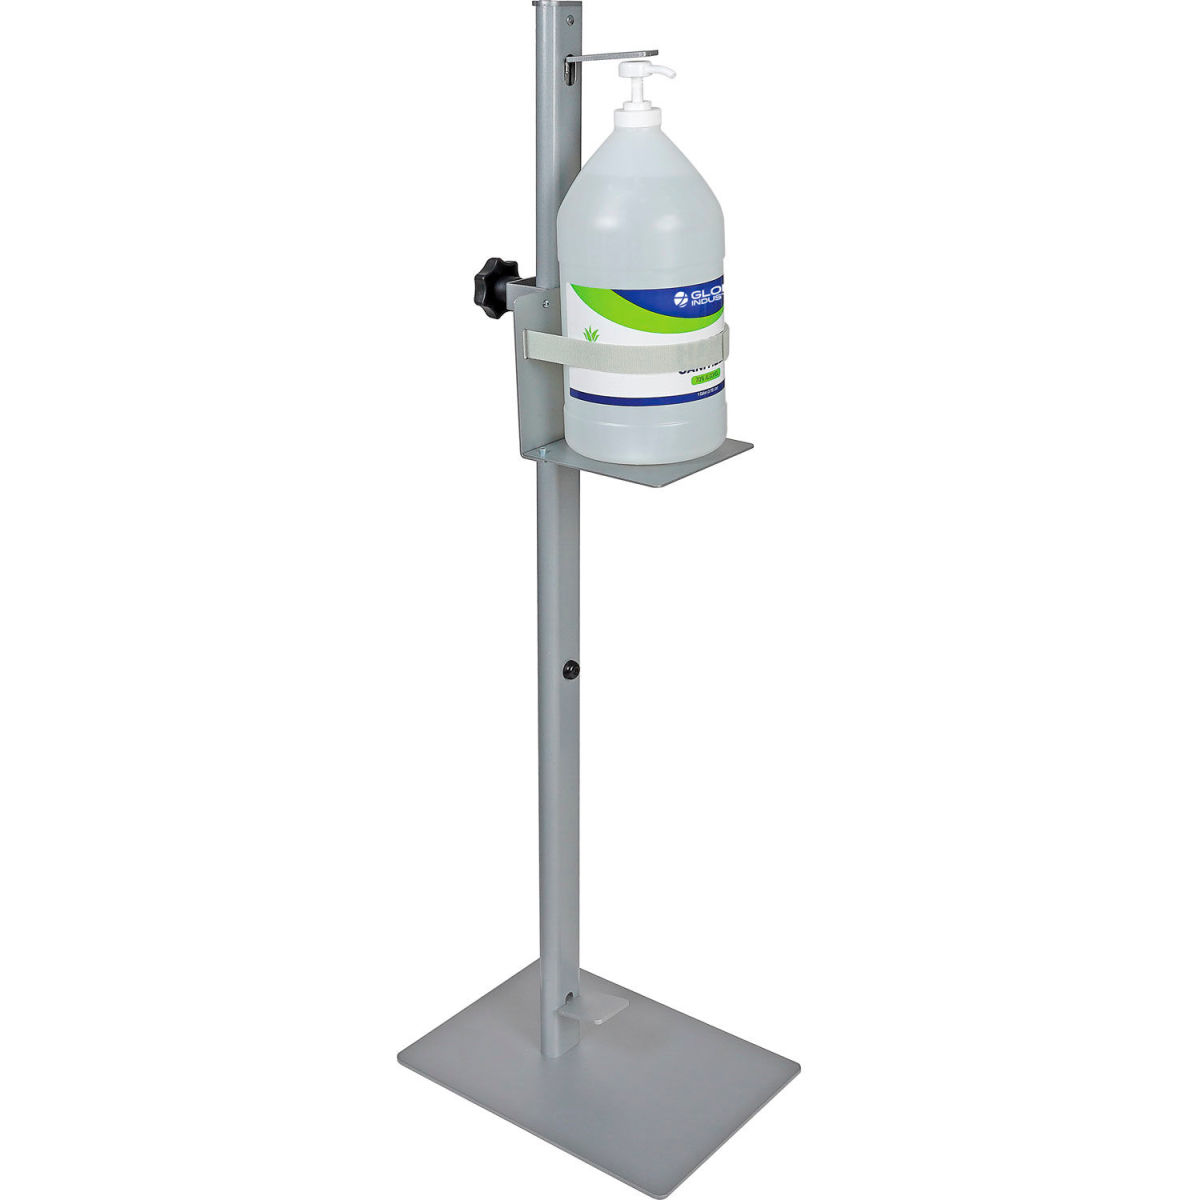 Picture of Testrite Instrument 641545 1 gal Global Industrial Foot Operated Hand Sanitizer Dispenser with Pump